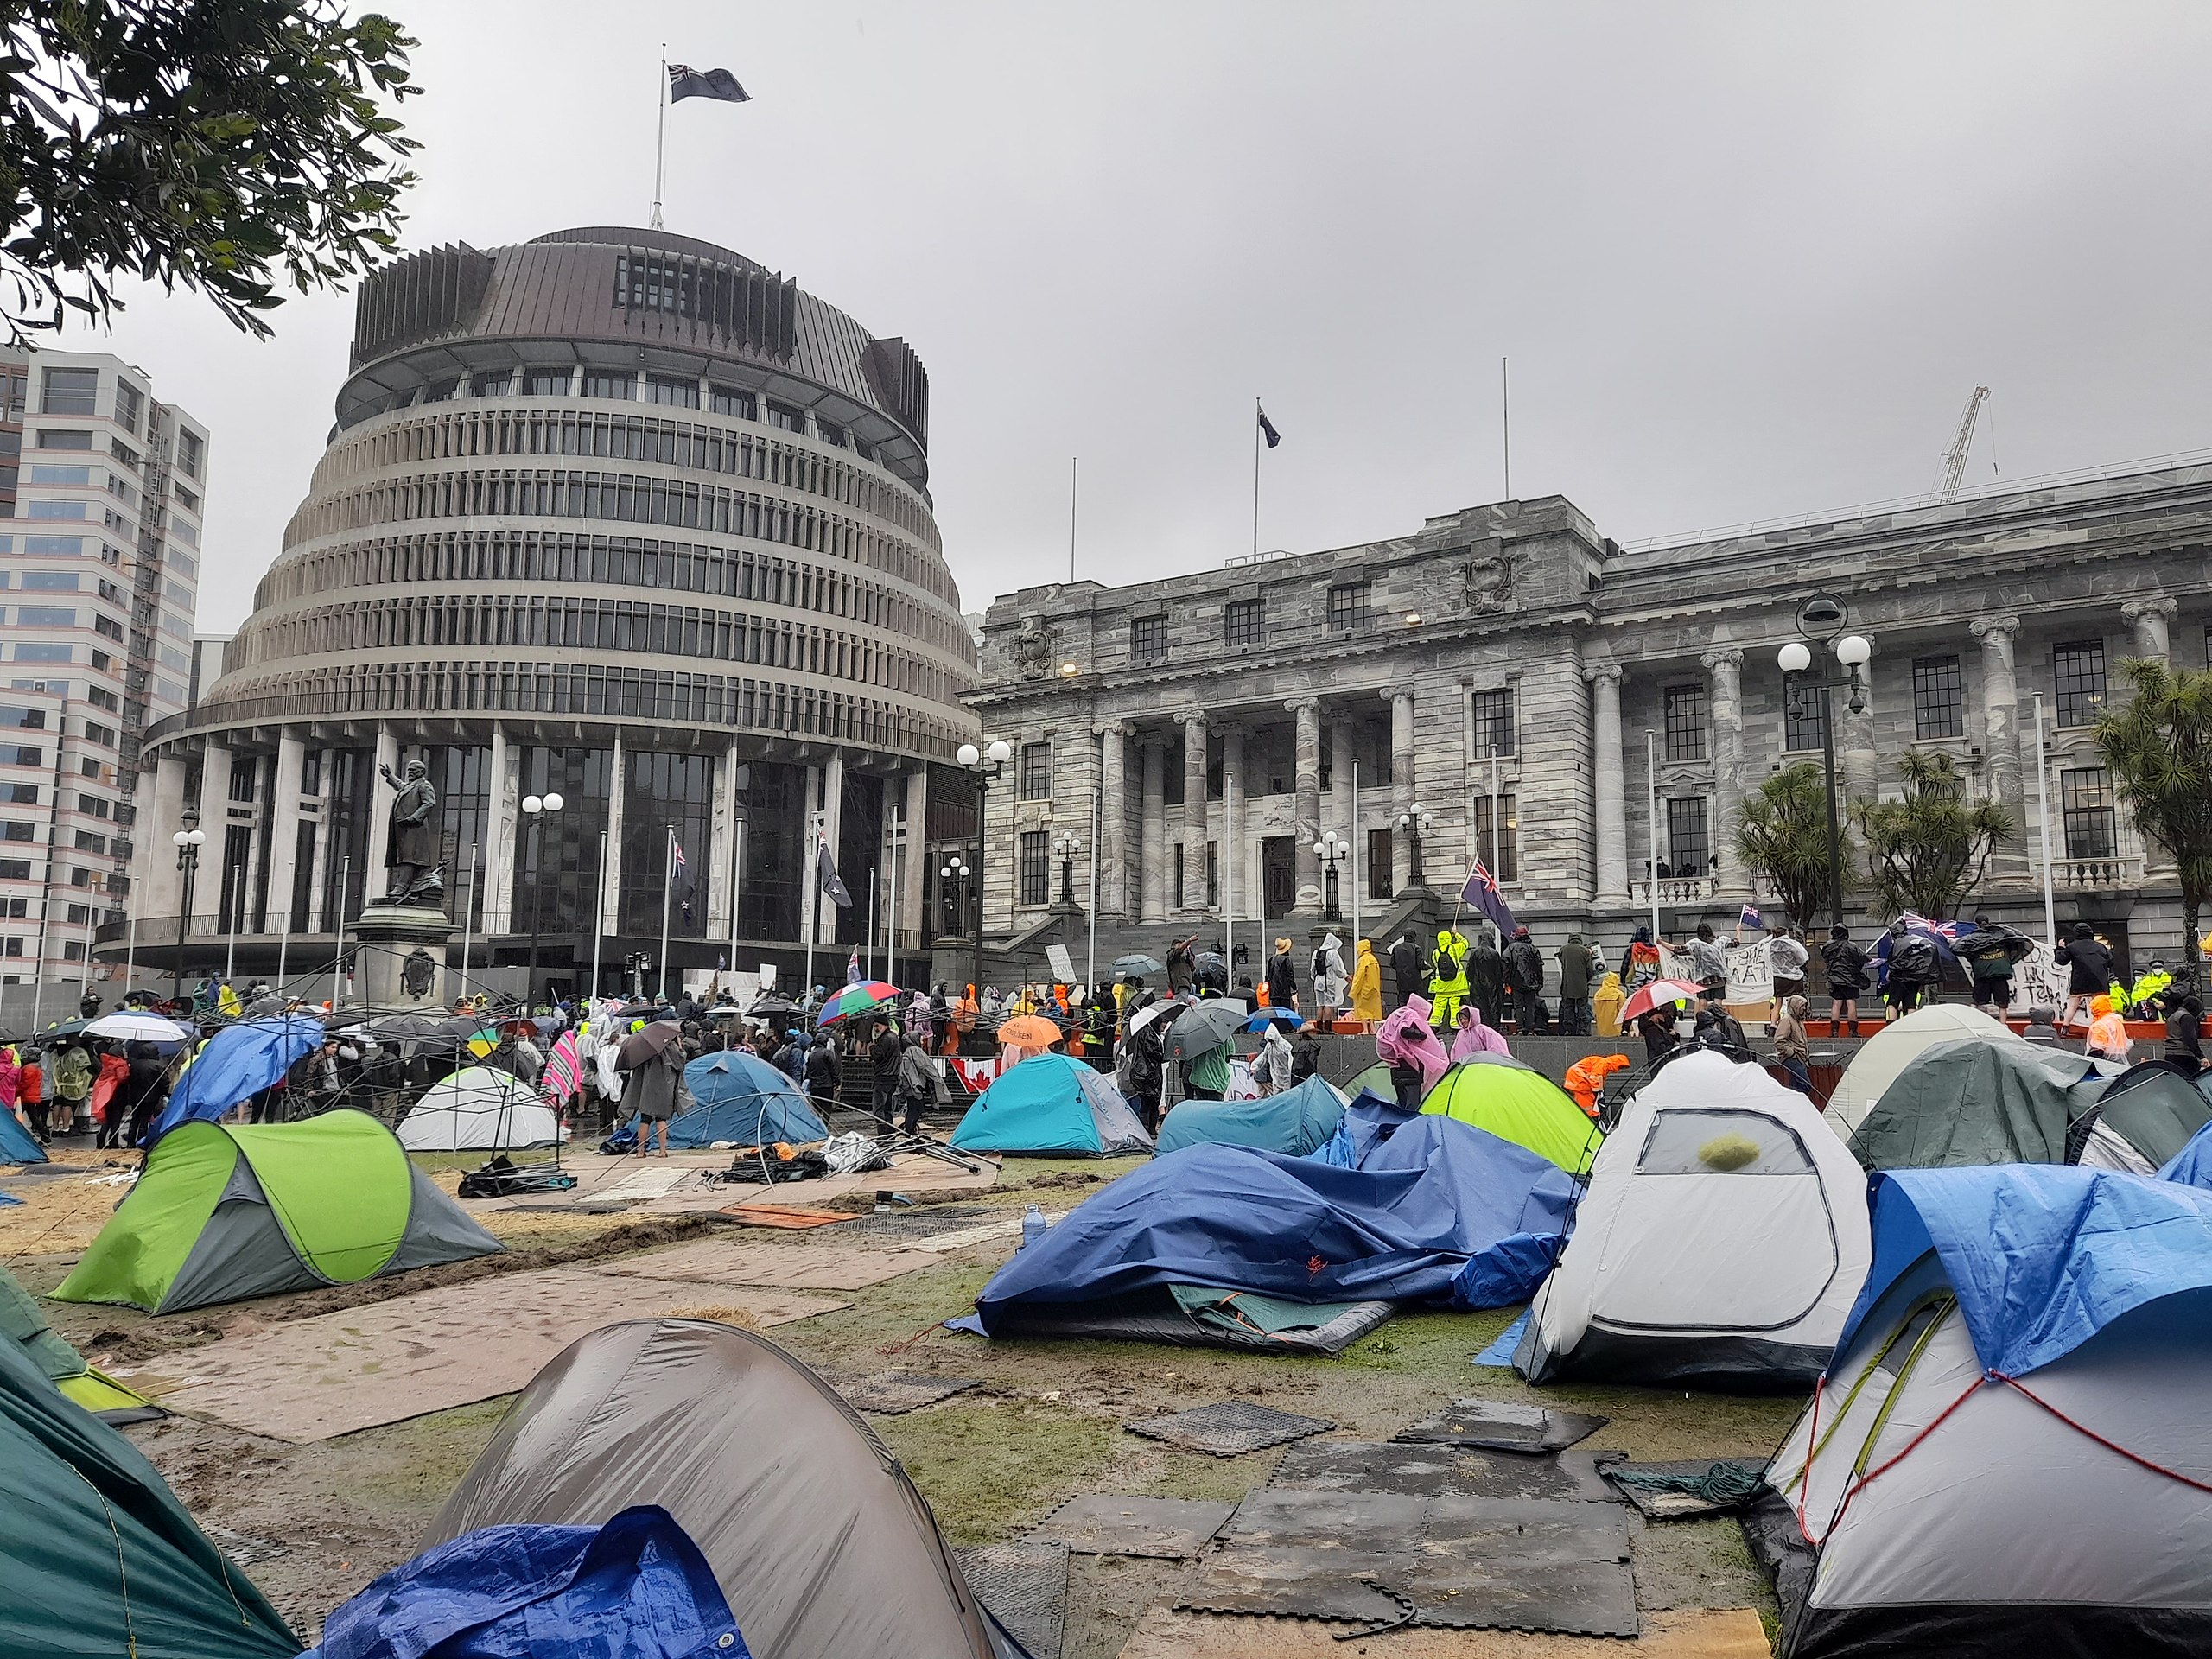 NZ’s “disinformation dozen” fuel fake news at Parliament protest – In The News